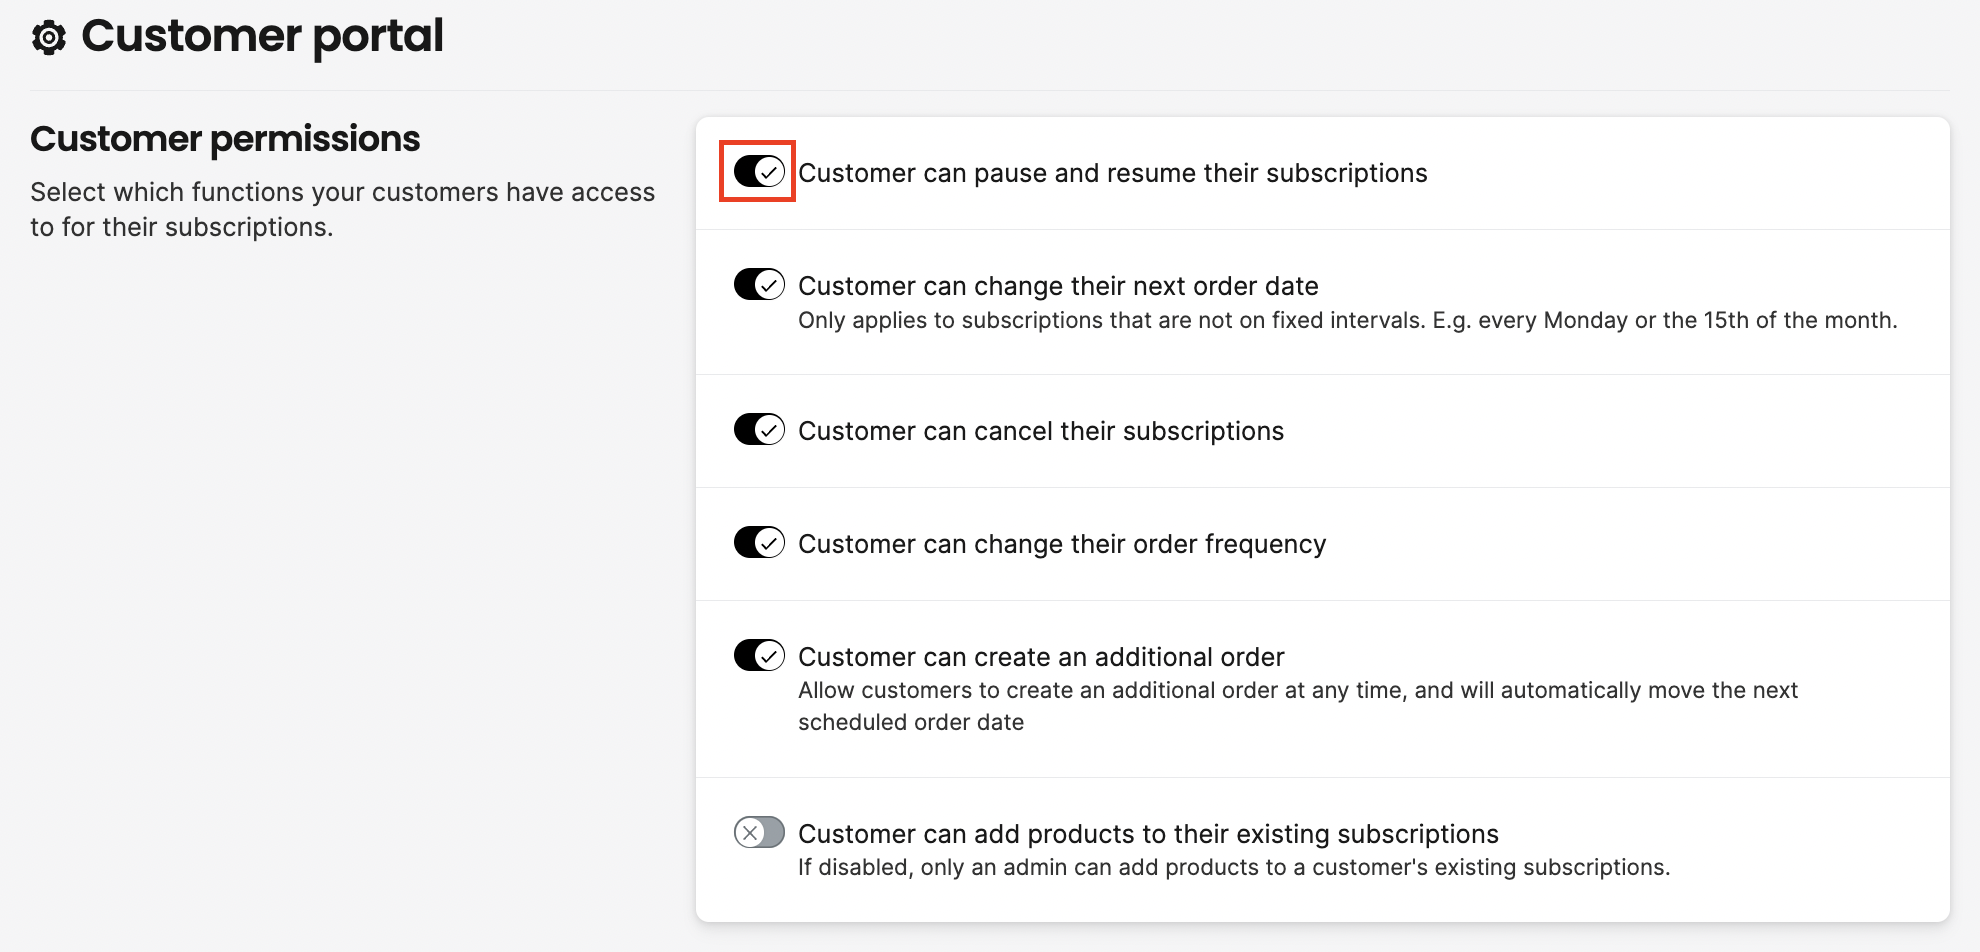 Customer can pause and resume their subscription